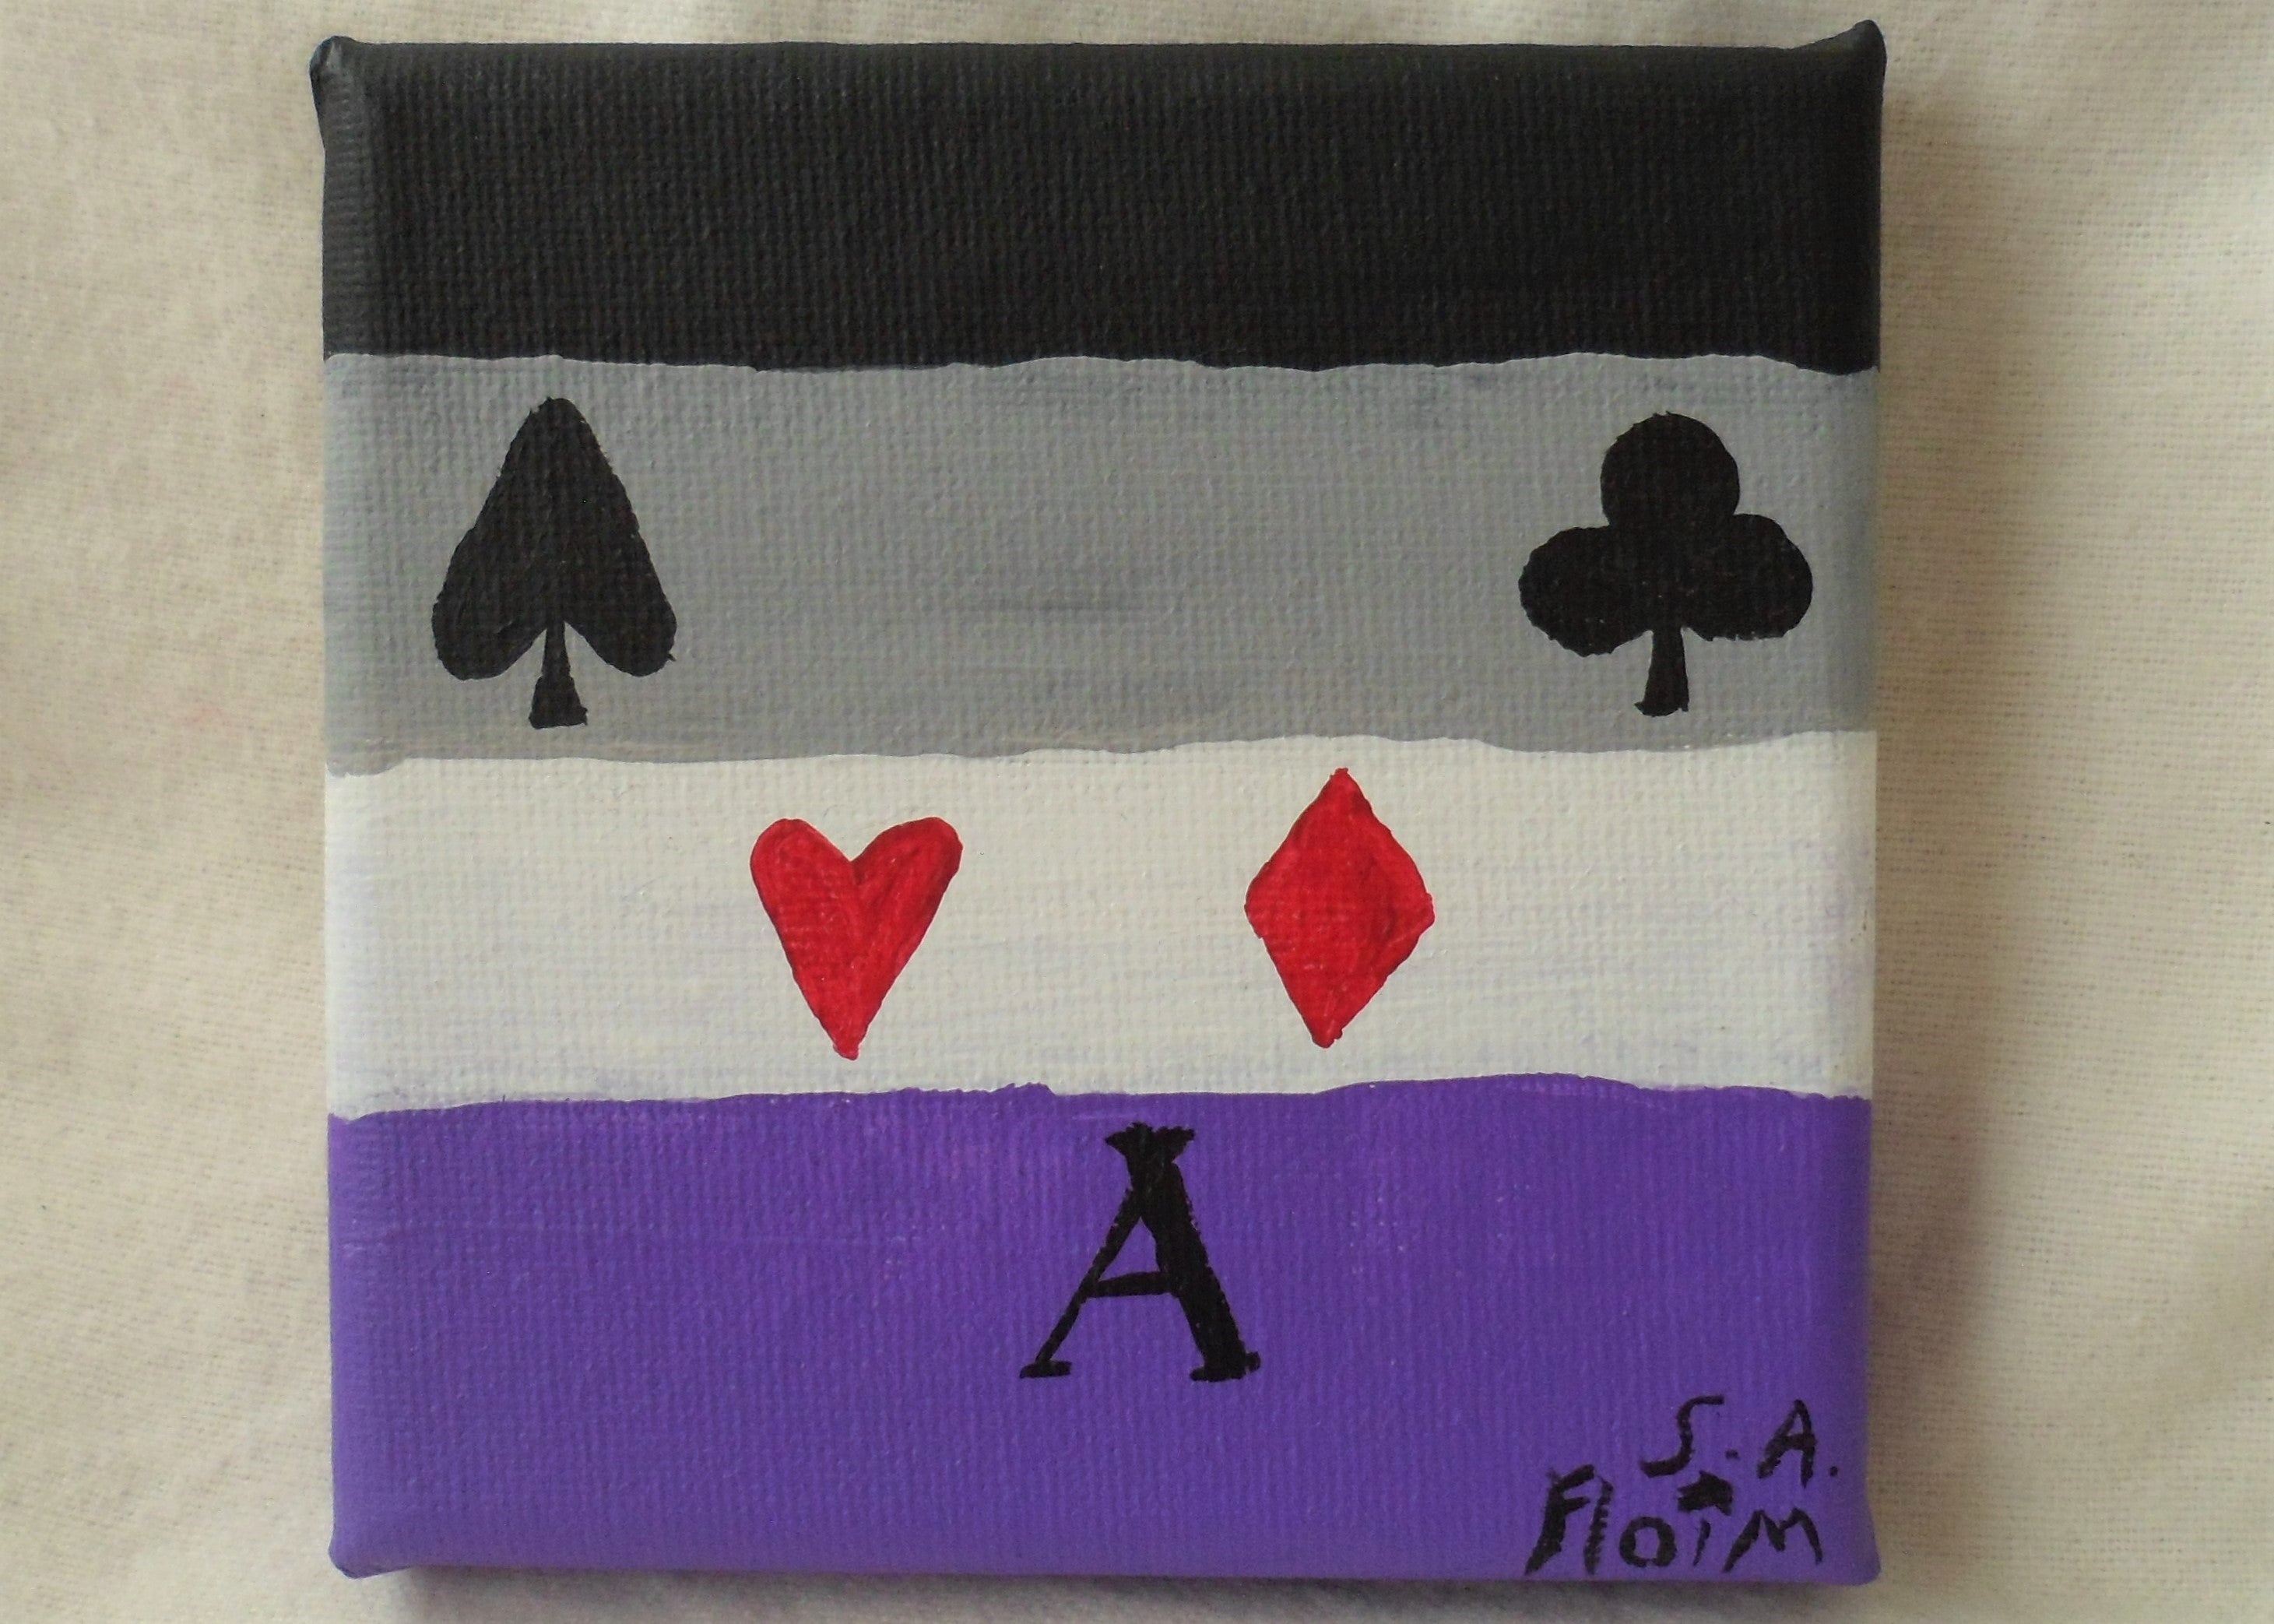 Ace Inspired Mini Canvas by S.A.Flaim - Tully Crafts